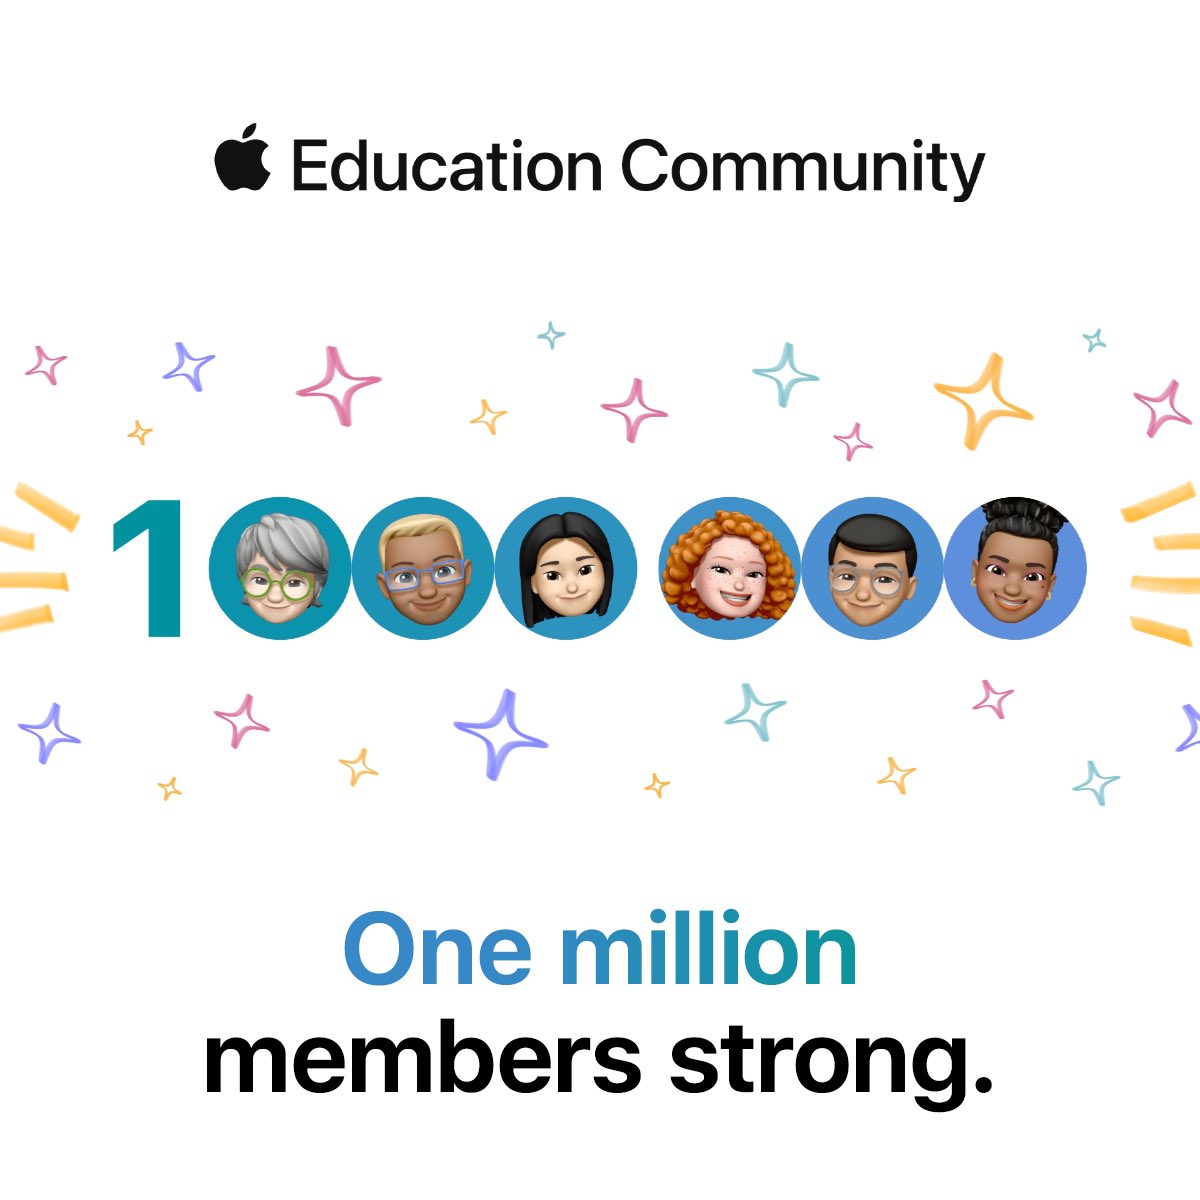 I’m proud to be part of the Apple Education Community!  Join over a million educators to explore amazing resources, creativity, & feedback right at your fingertips. #AppleTeacher #AppleDistinguishedEducator

Join today 🔗 apple.co/educommunity1mm